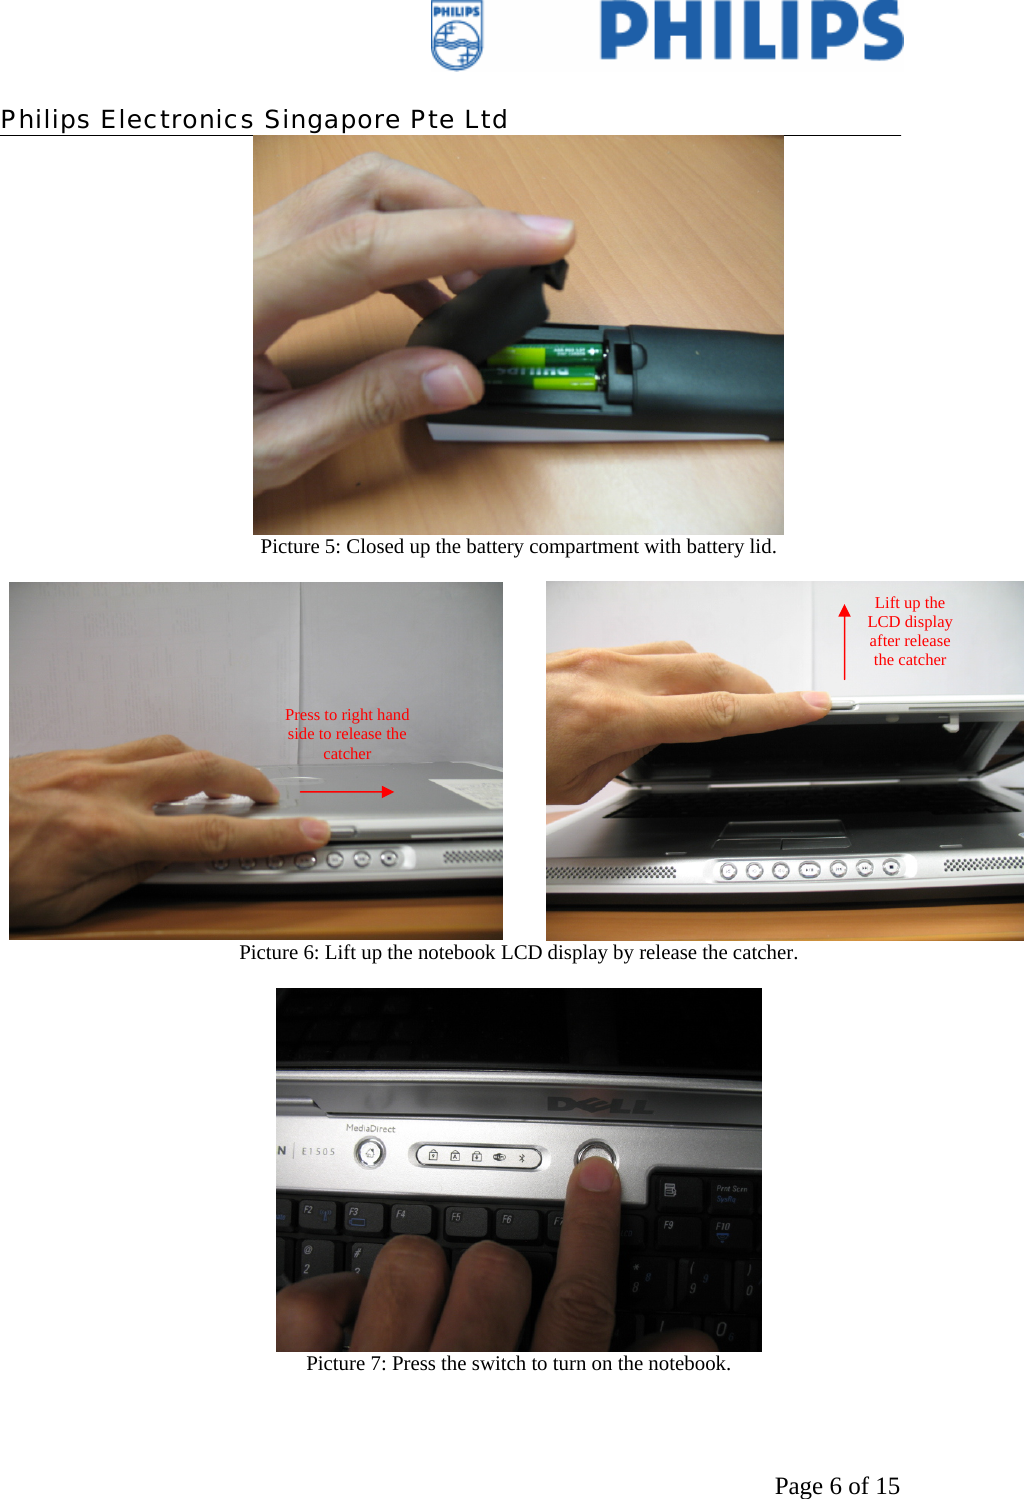    Philips Electronics Singapore Pte Ltd  Page 6 of 15 Picture 5: Closed up the battery compartment with battery lid.    Picture 6: Lift up the notebook LCD display by release the catcher.   Picture 7: Press the switch to turn on the notebook.  Press to right hand side to release the catcher Lift up the LCD display after release the catcher 